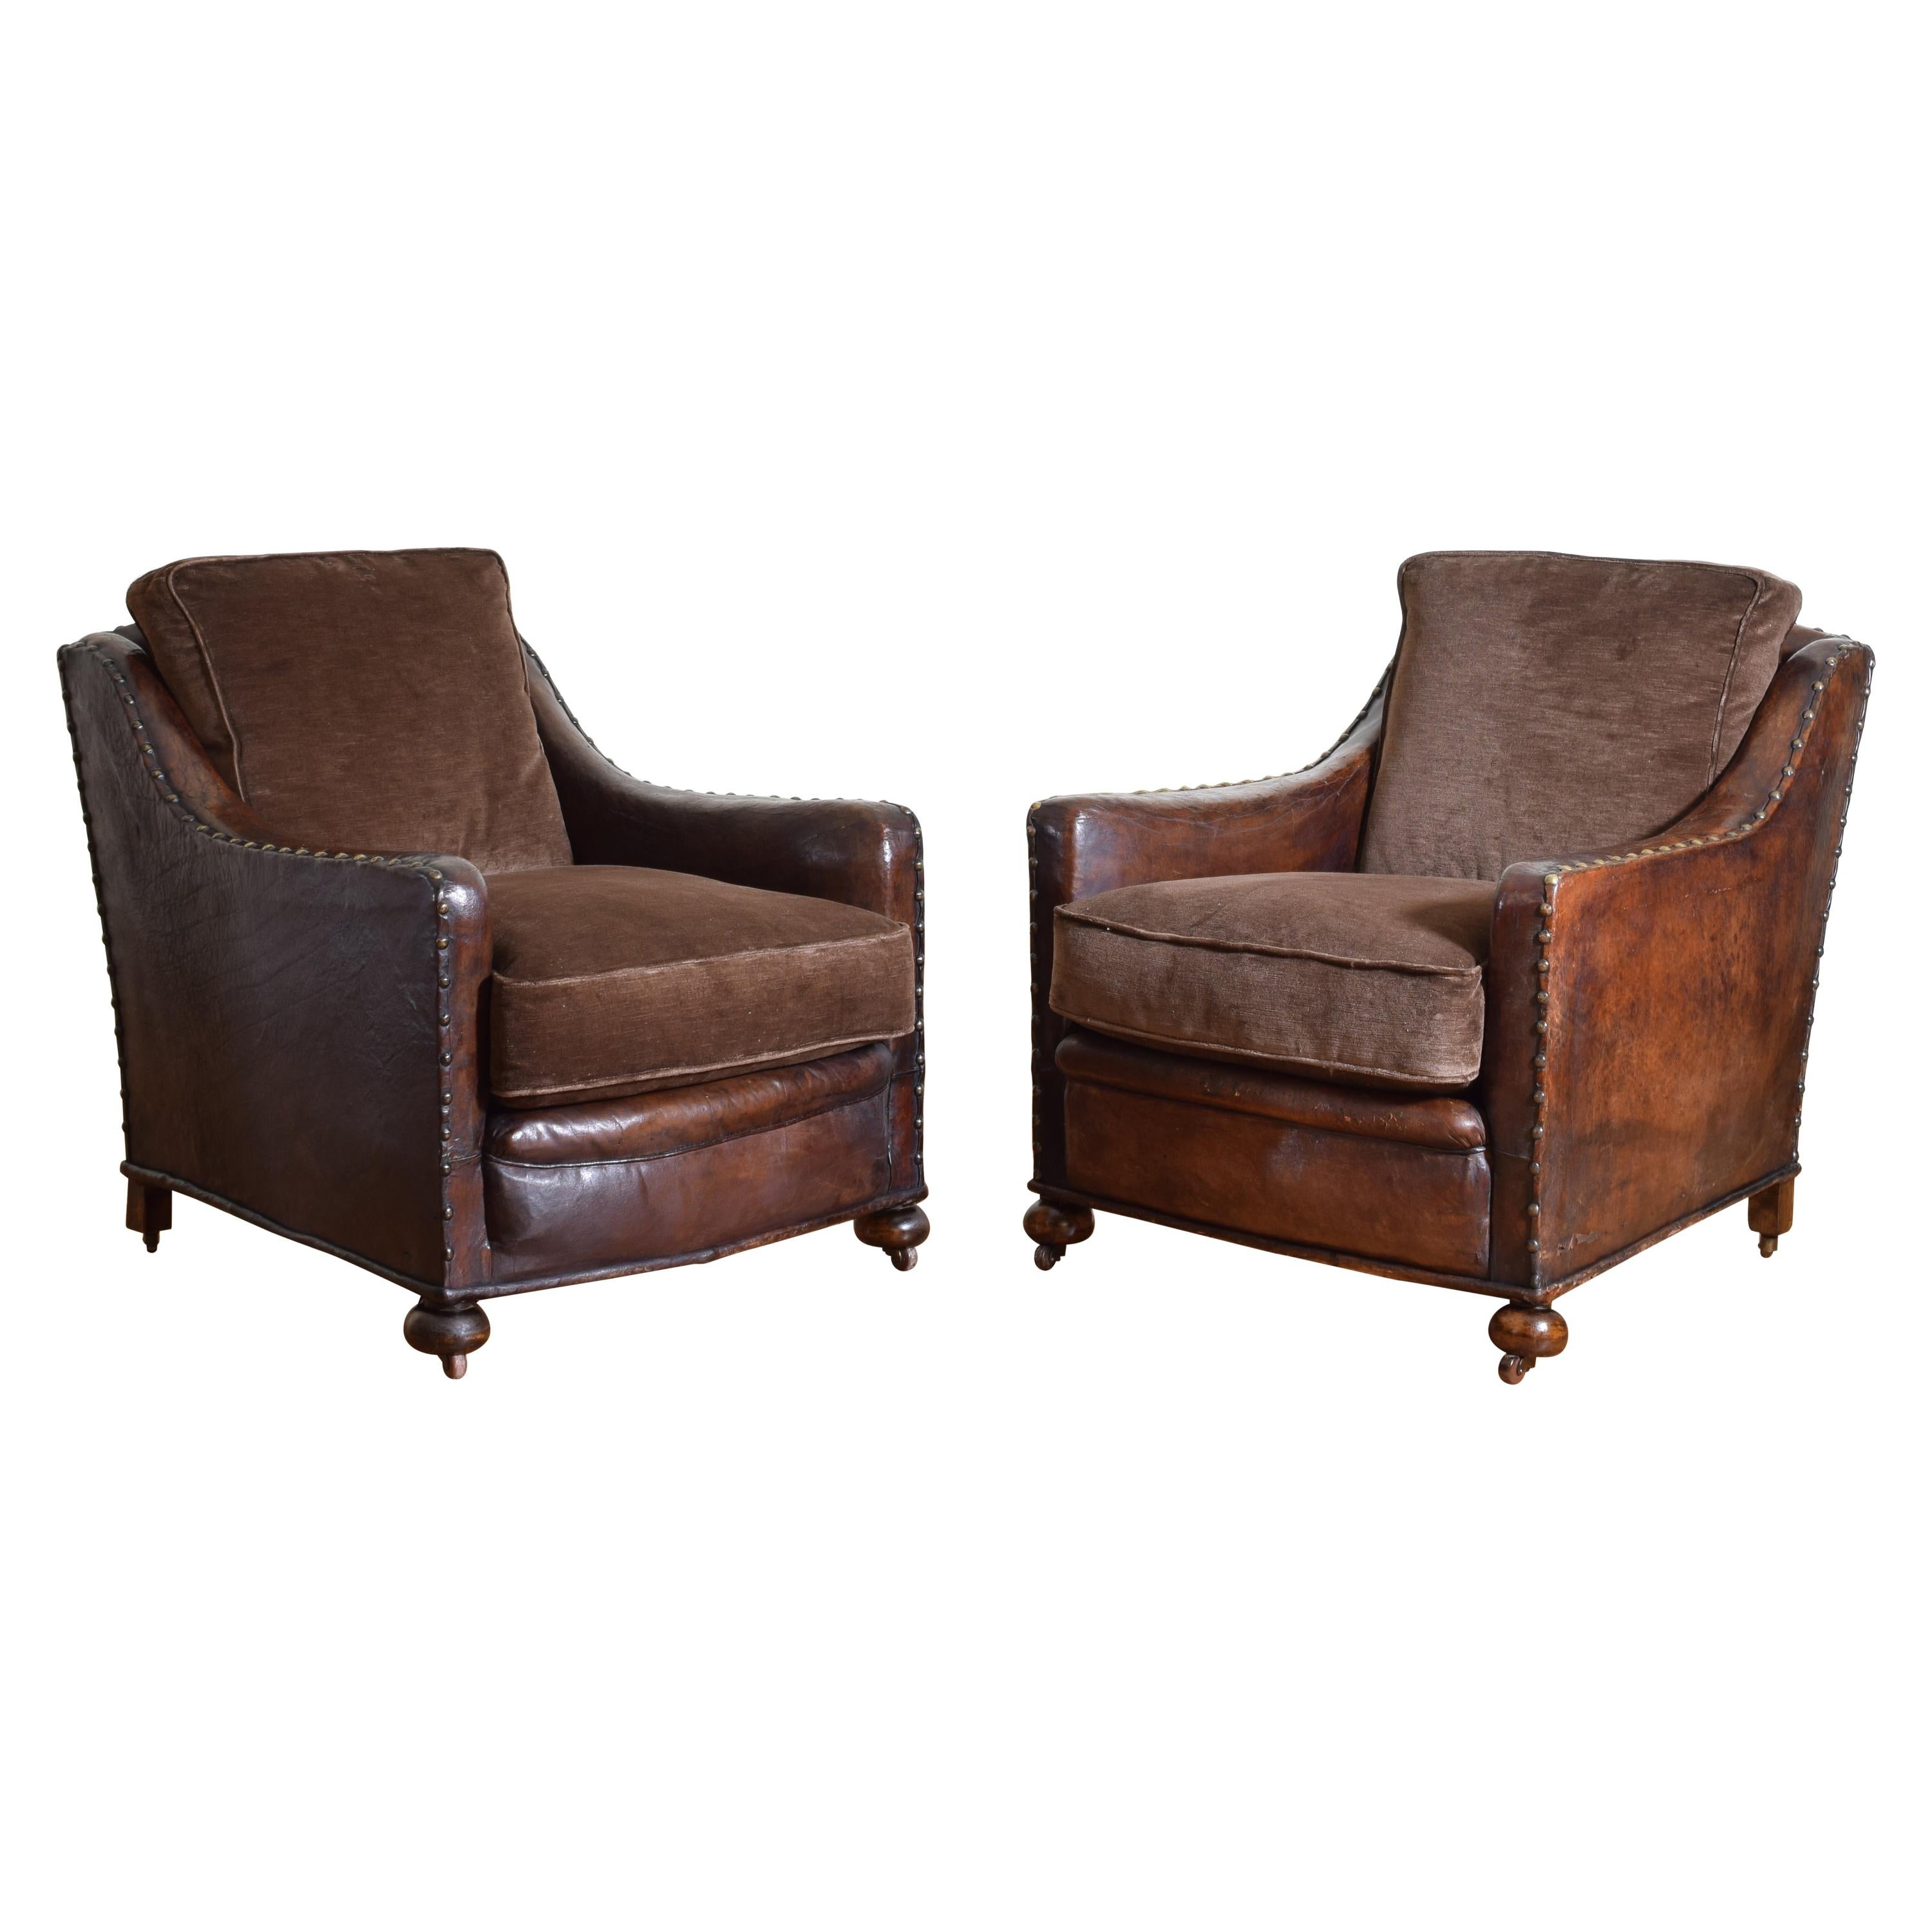 Pair of French Art Deco Period Leather and Velvet Upholstered Club Chairs 7